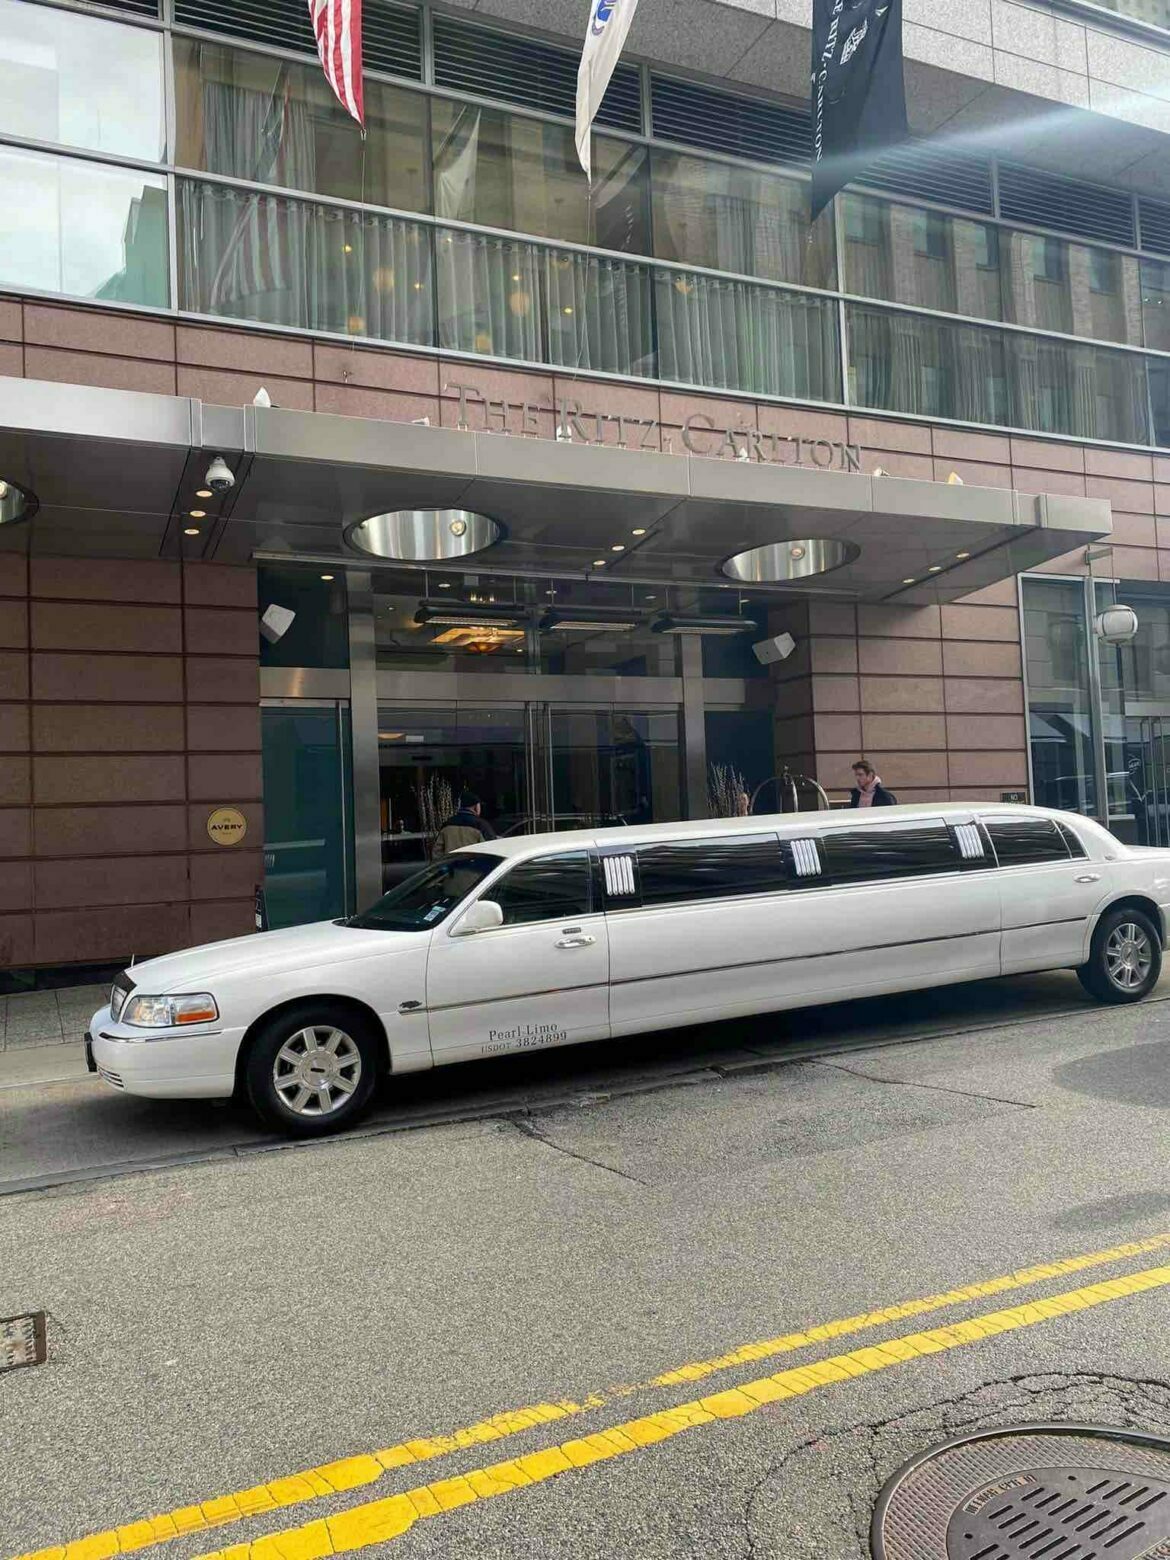 Wedding Limo – The 6 Valuable Questions Every Bride Needs to Ask